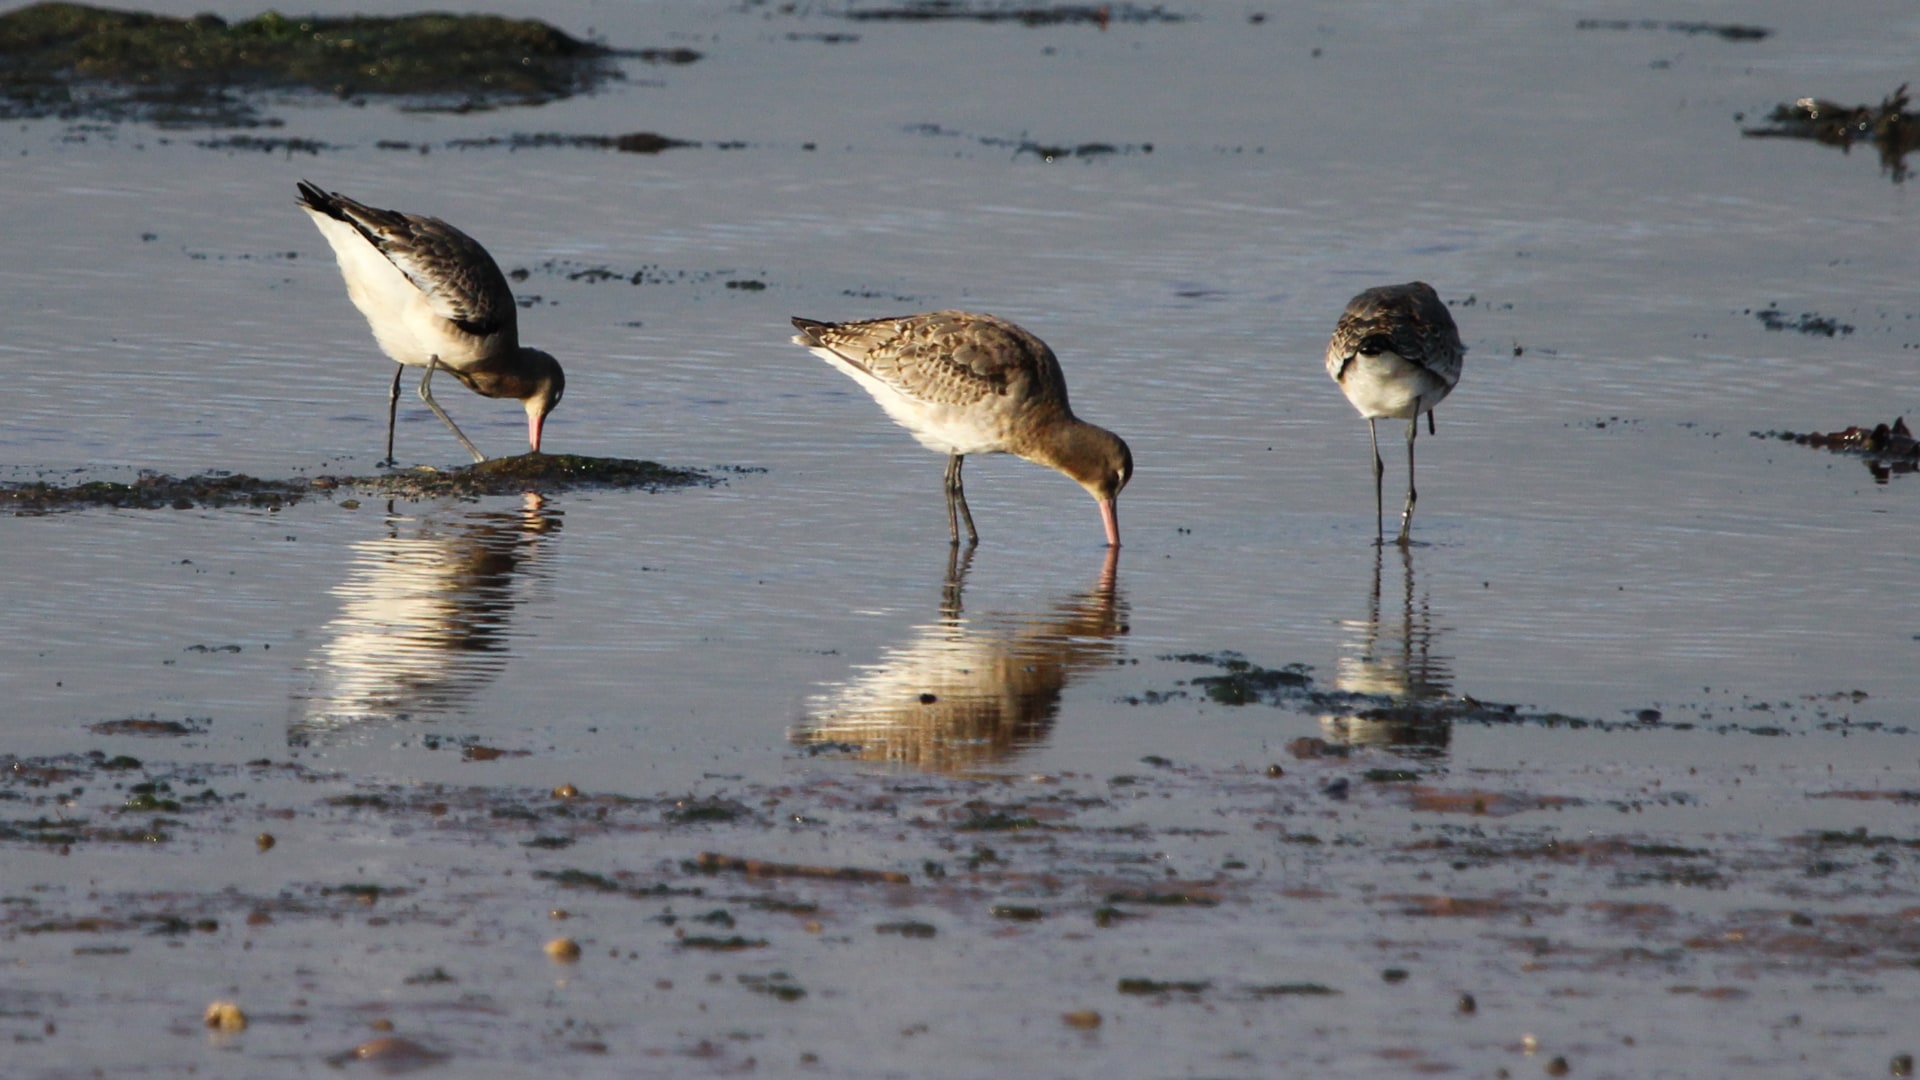 Black-tailed godwits in Exe Estuary